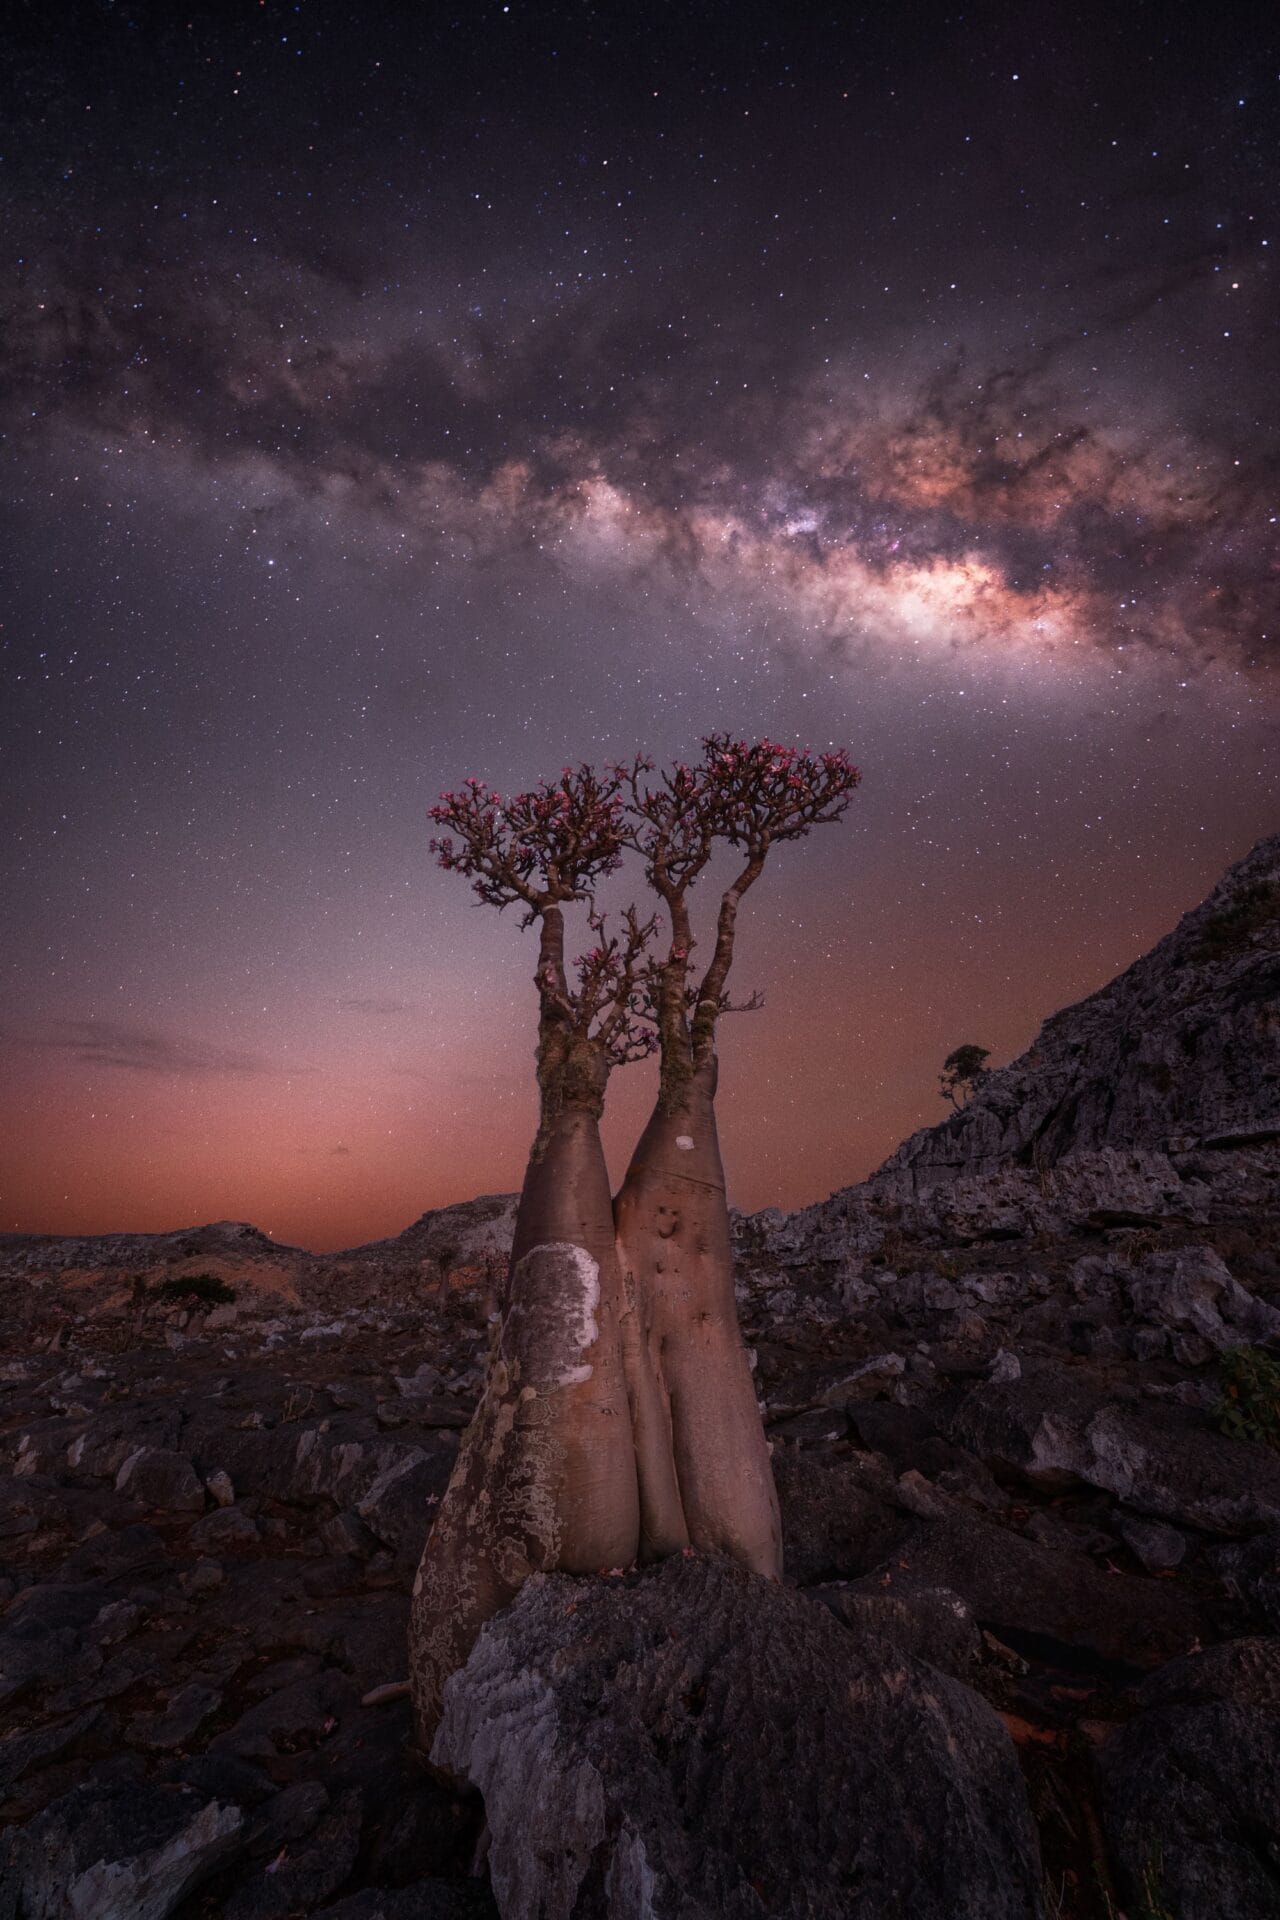 the brilliant star studded milky way above a craggy landscape with a single baobab tree